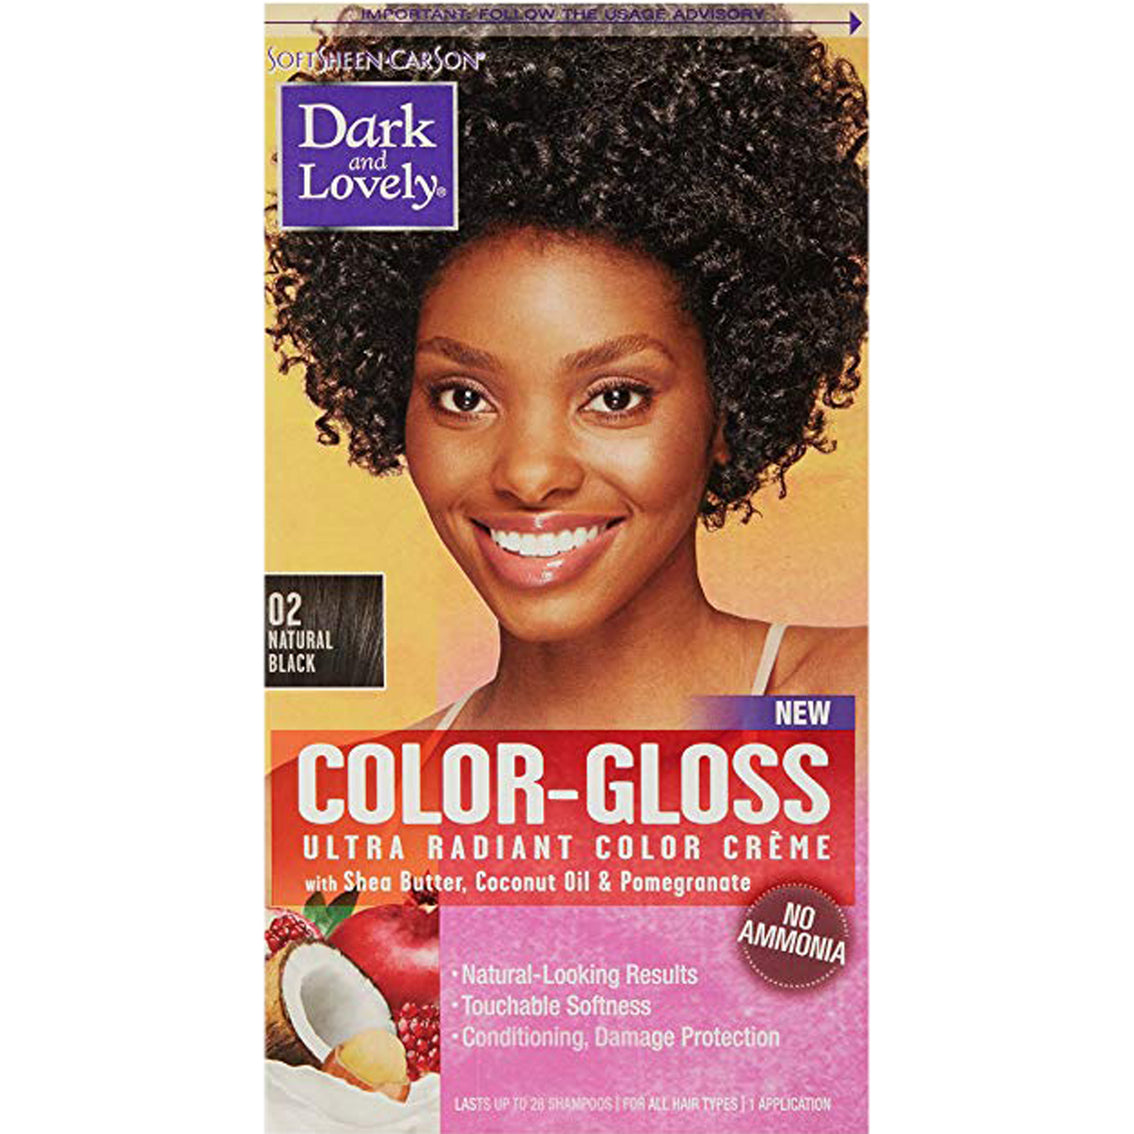 SoftSheen-Carson Dark and Lovely Color-Gloss Ultra Radiant Color Crème, Natural Black 02